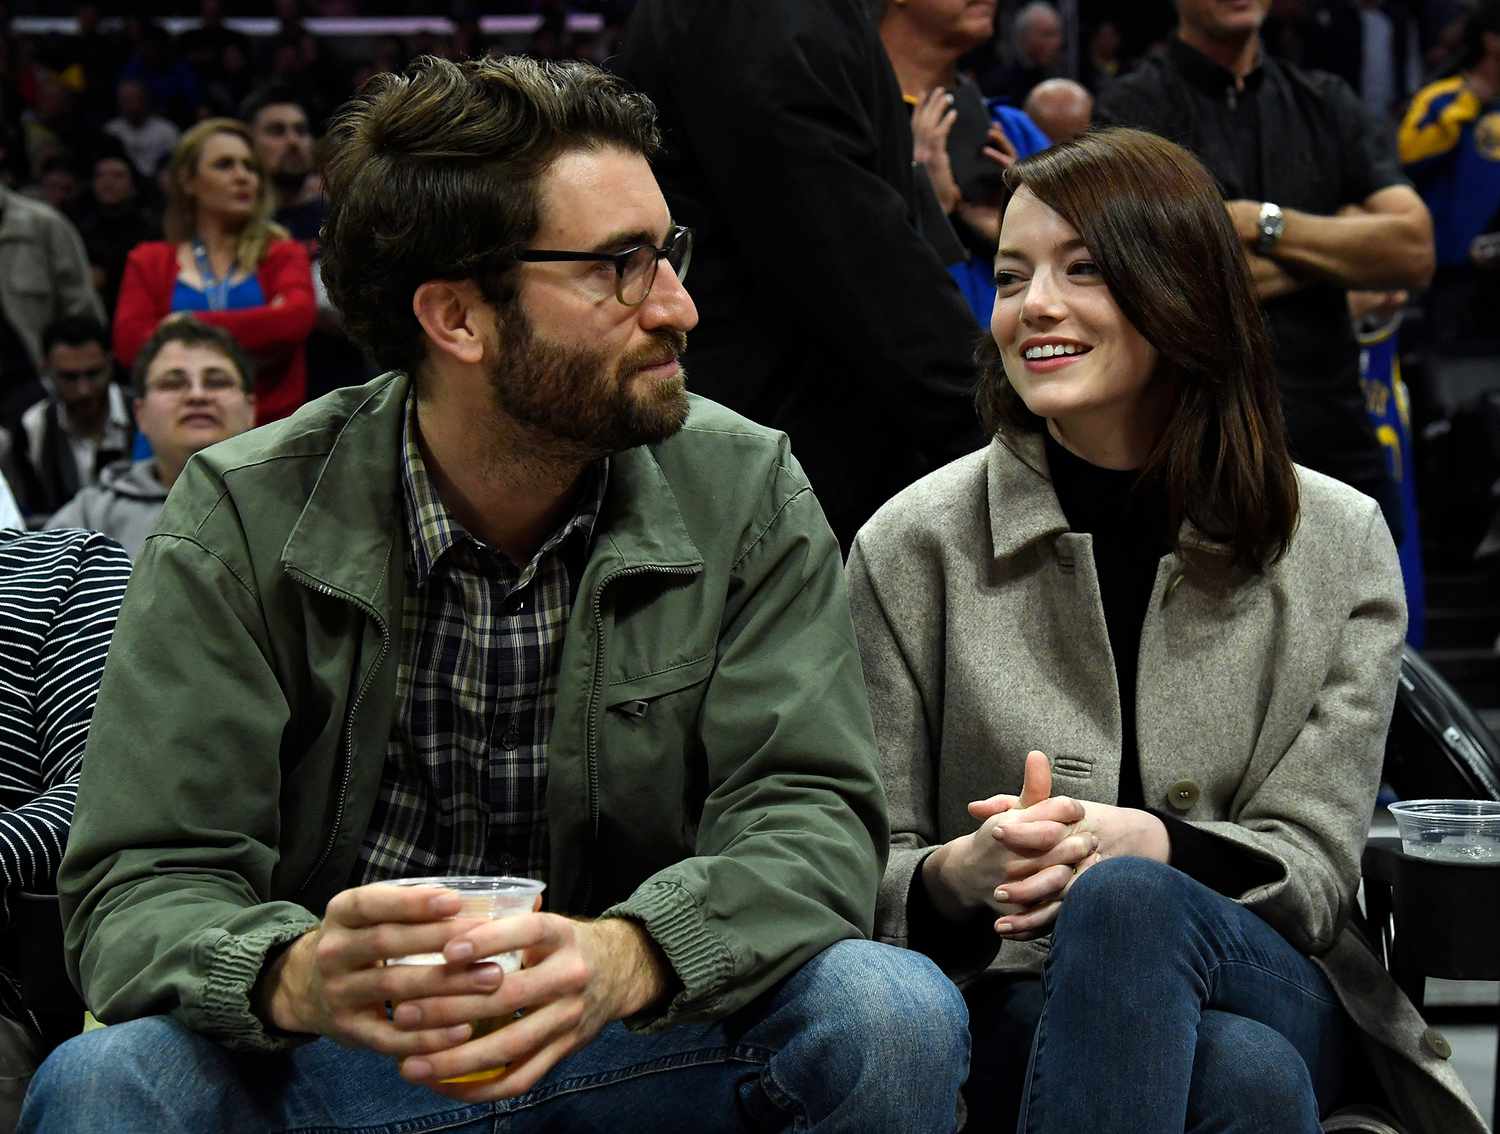 Emma Stone and Dave McCary attend the Golden State Warriors and Los Angeles Clippers basketball game at Staples Center on January 18, 2019 in Los Angeles, California. NOTE TO USER: User expressly acknowledges and agrees that, by downloading and or using this photograph, User is consenting to the terms and conditions of the Getty Images License Agreement